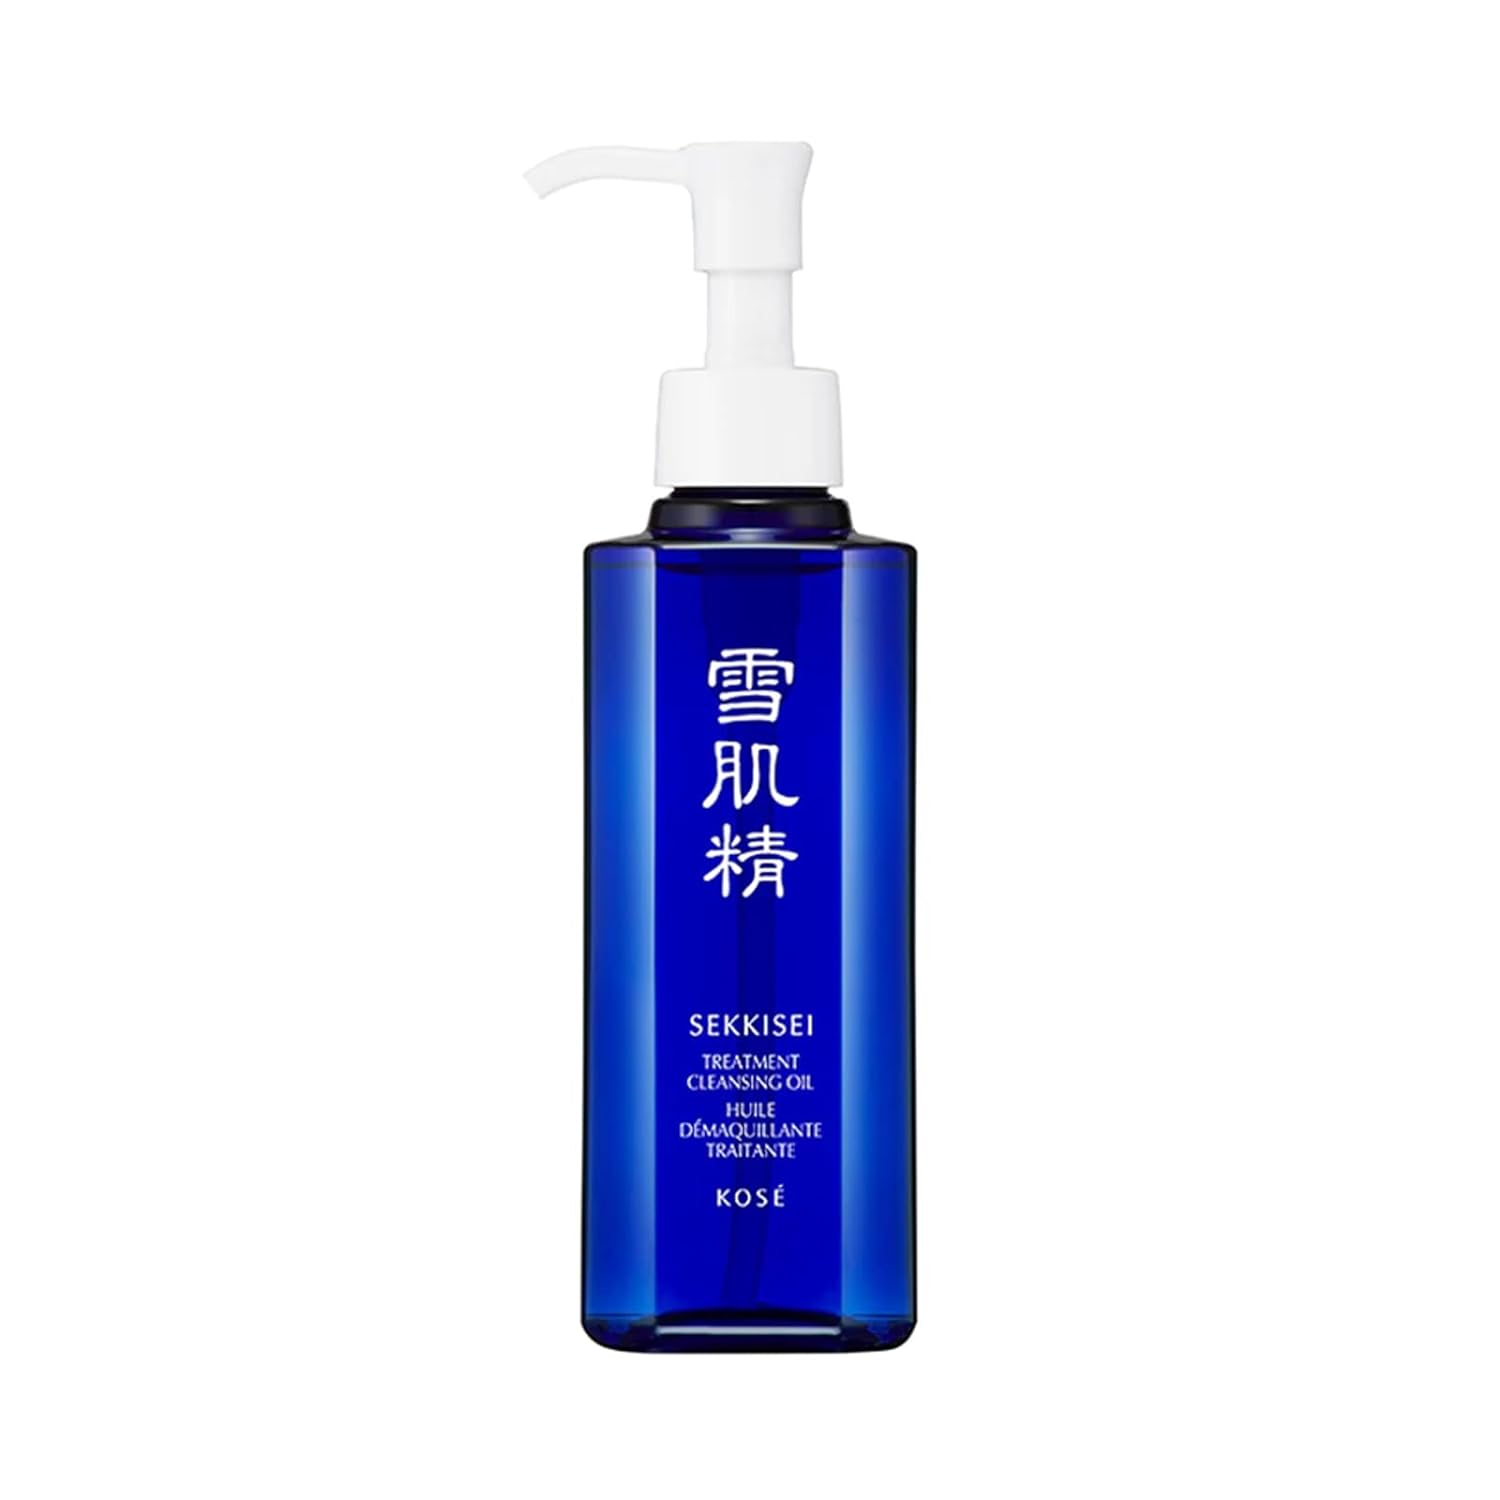 SEKKISEI Treatment Cleansing Oil, Facial Cleanser &amp; Makeup Remover, 10.1 Ounce